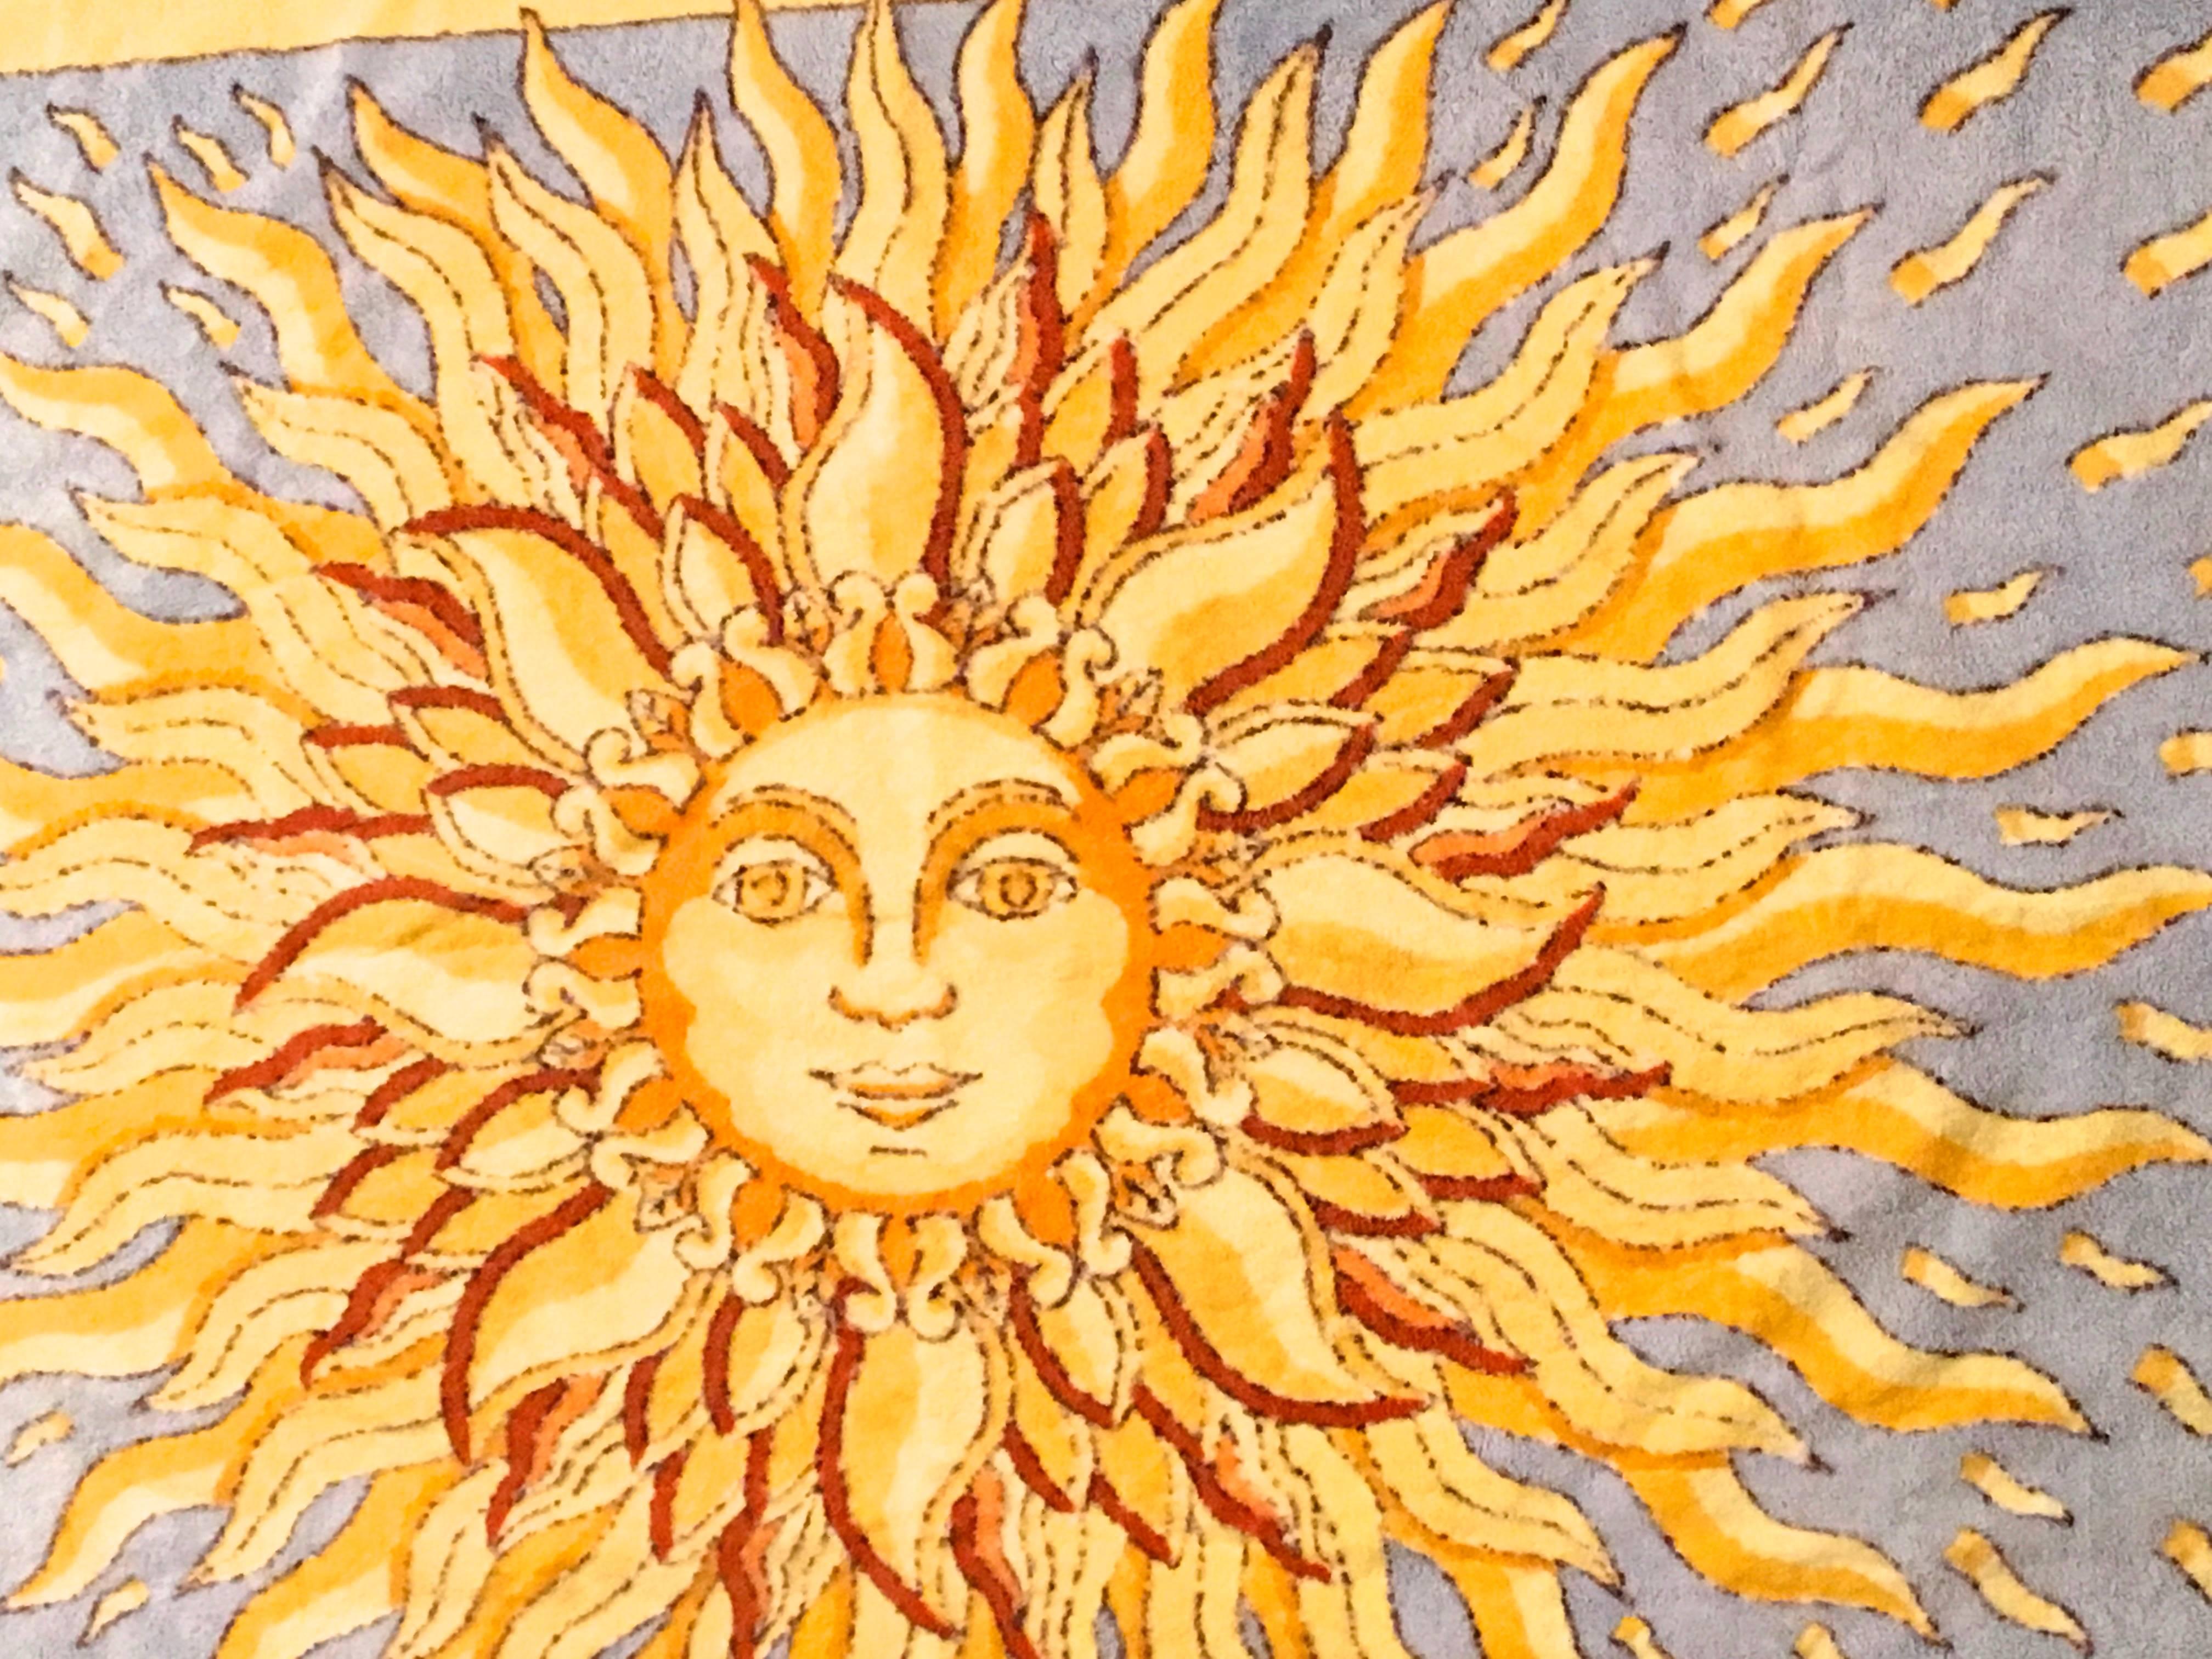 Presented here is a lovely beach towel by Hermes Paris. This beautiful beach towel is made from 100% cotton. The design is a large sun with a face in vibrant colors of orange and yellow. The design of this towel is timeless. The towel is signed